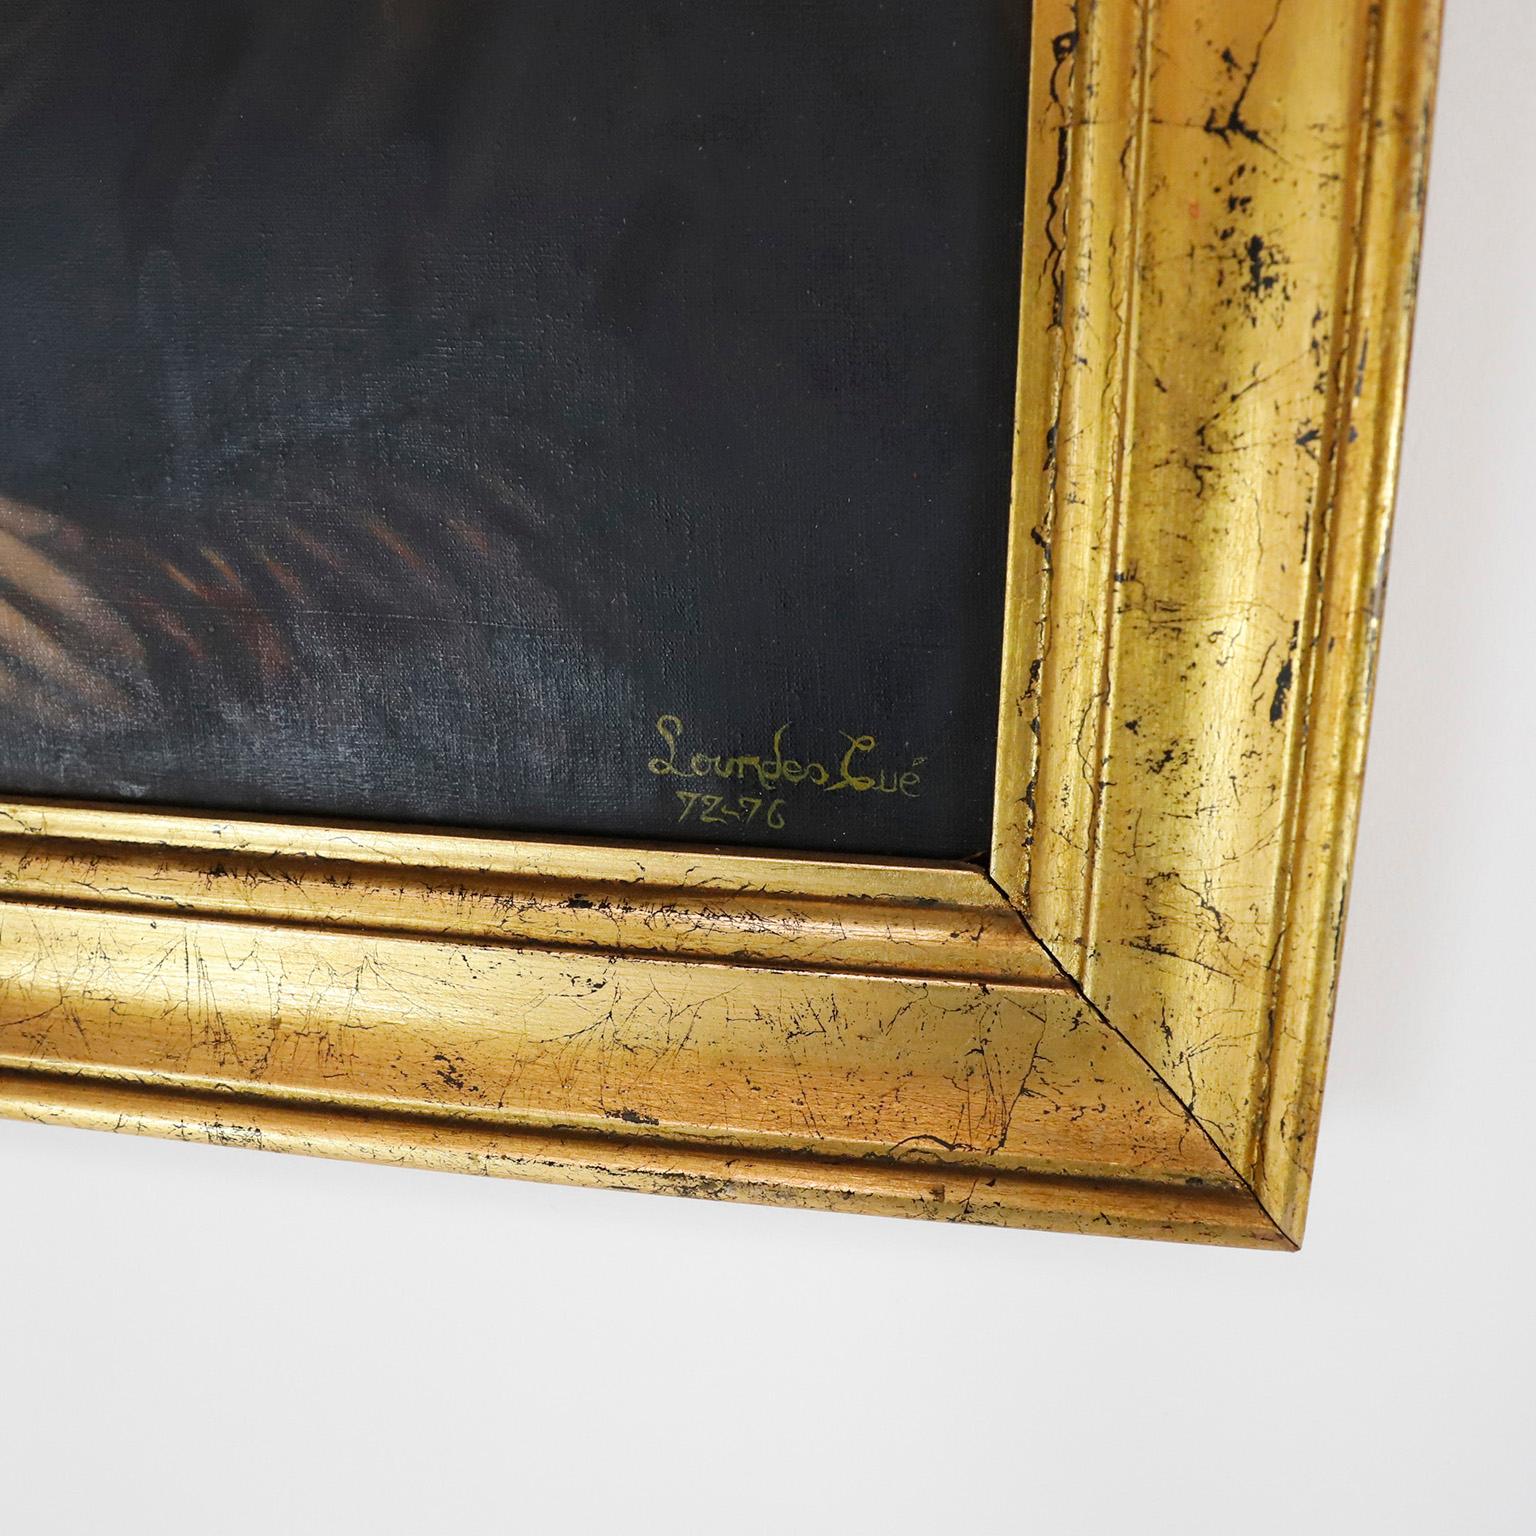 Painted during 1972 and 1976. We offer this Antique Monalisa handmade painted replica signed by Lourdes Cúe.